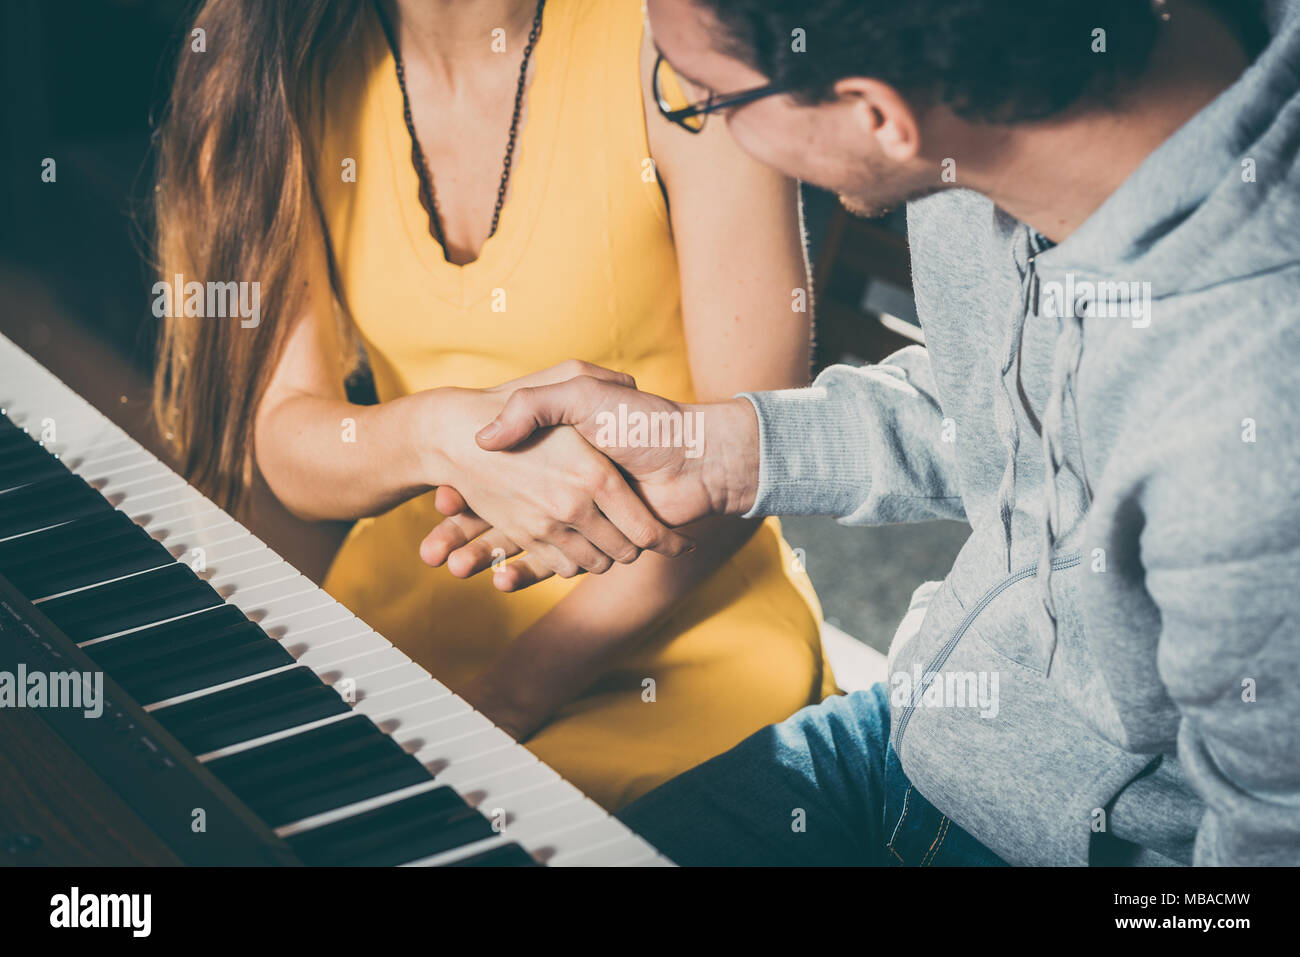 Piano teacher and student shaking hands after lesson Stock Photo